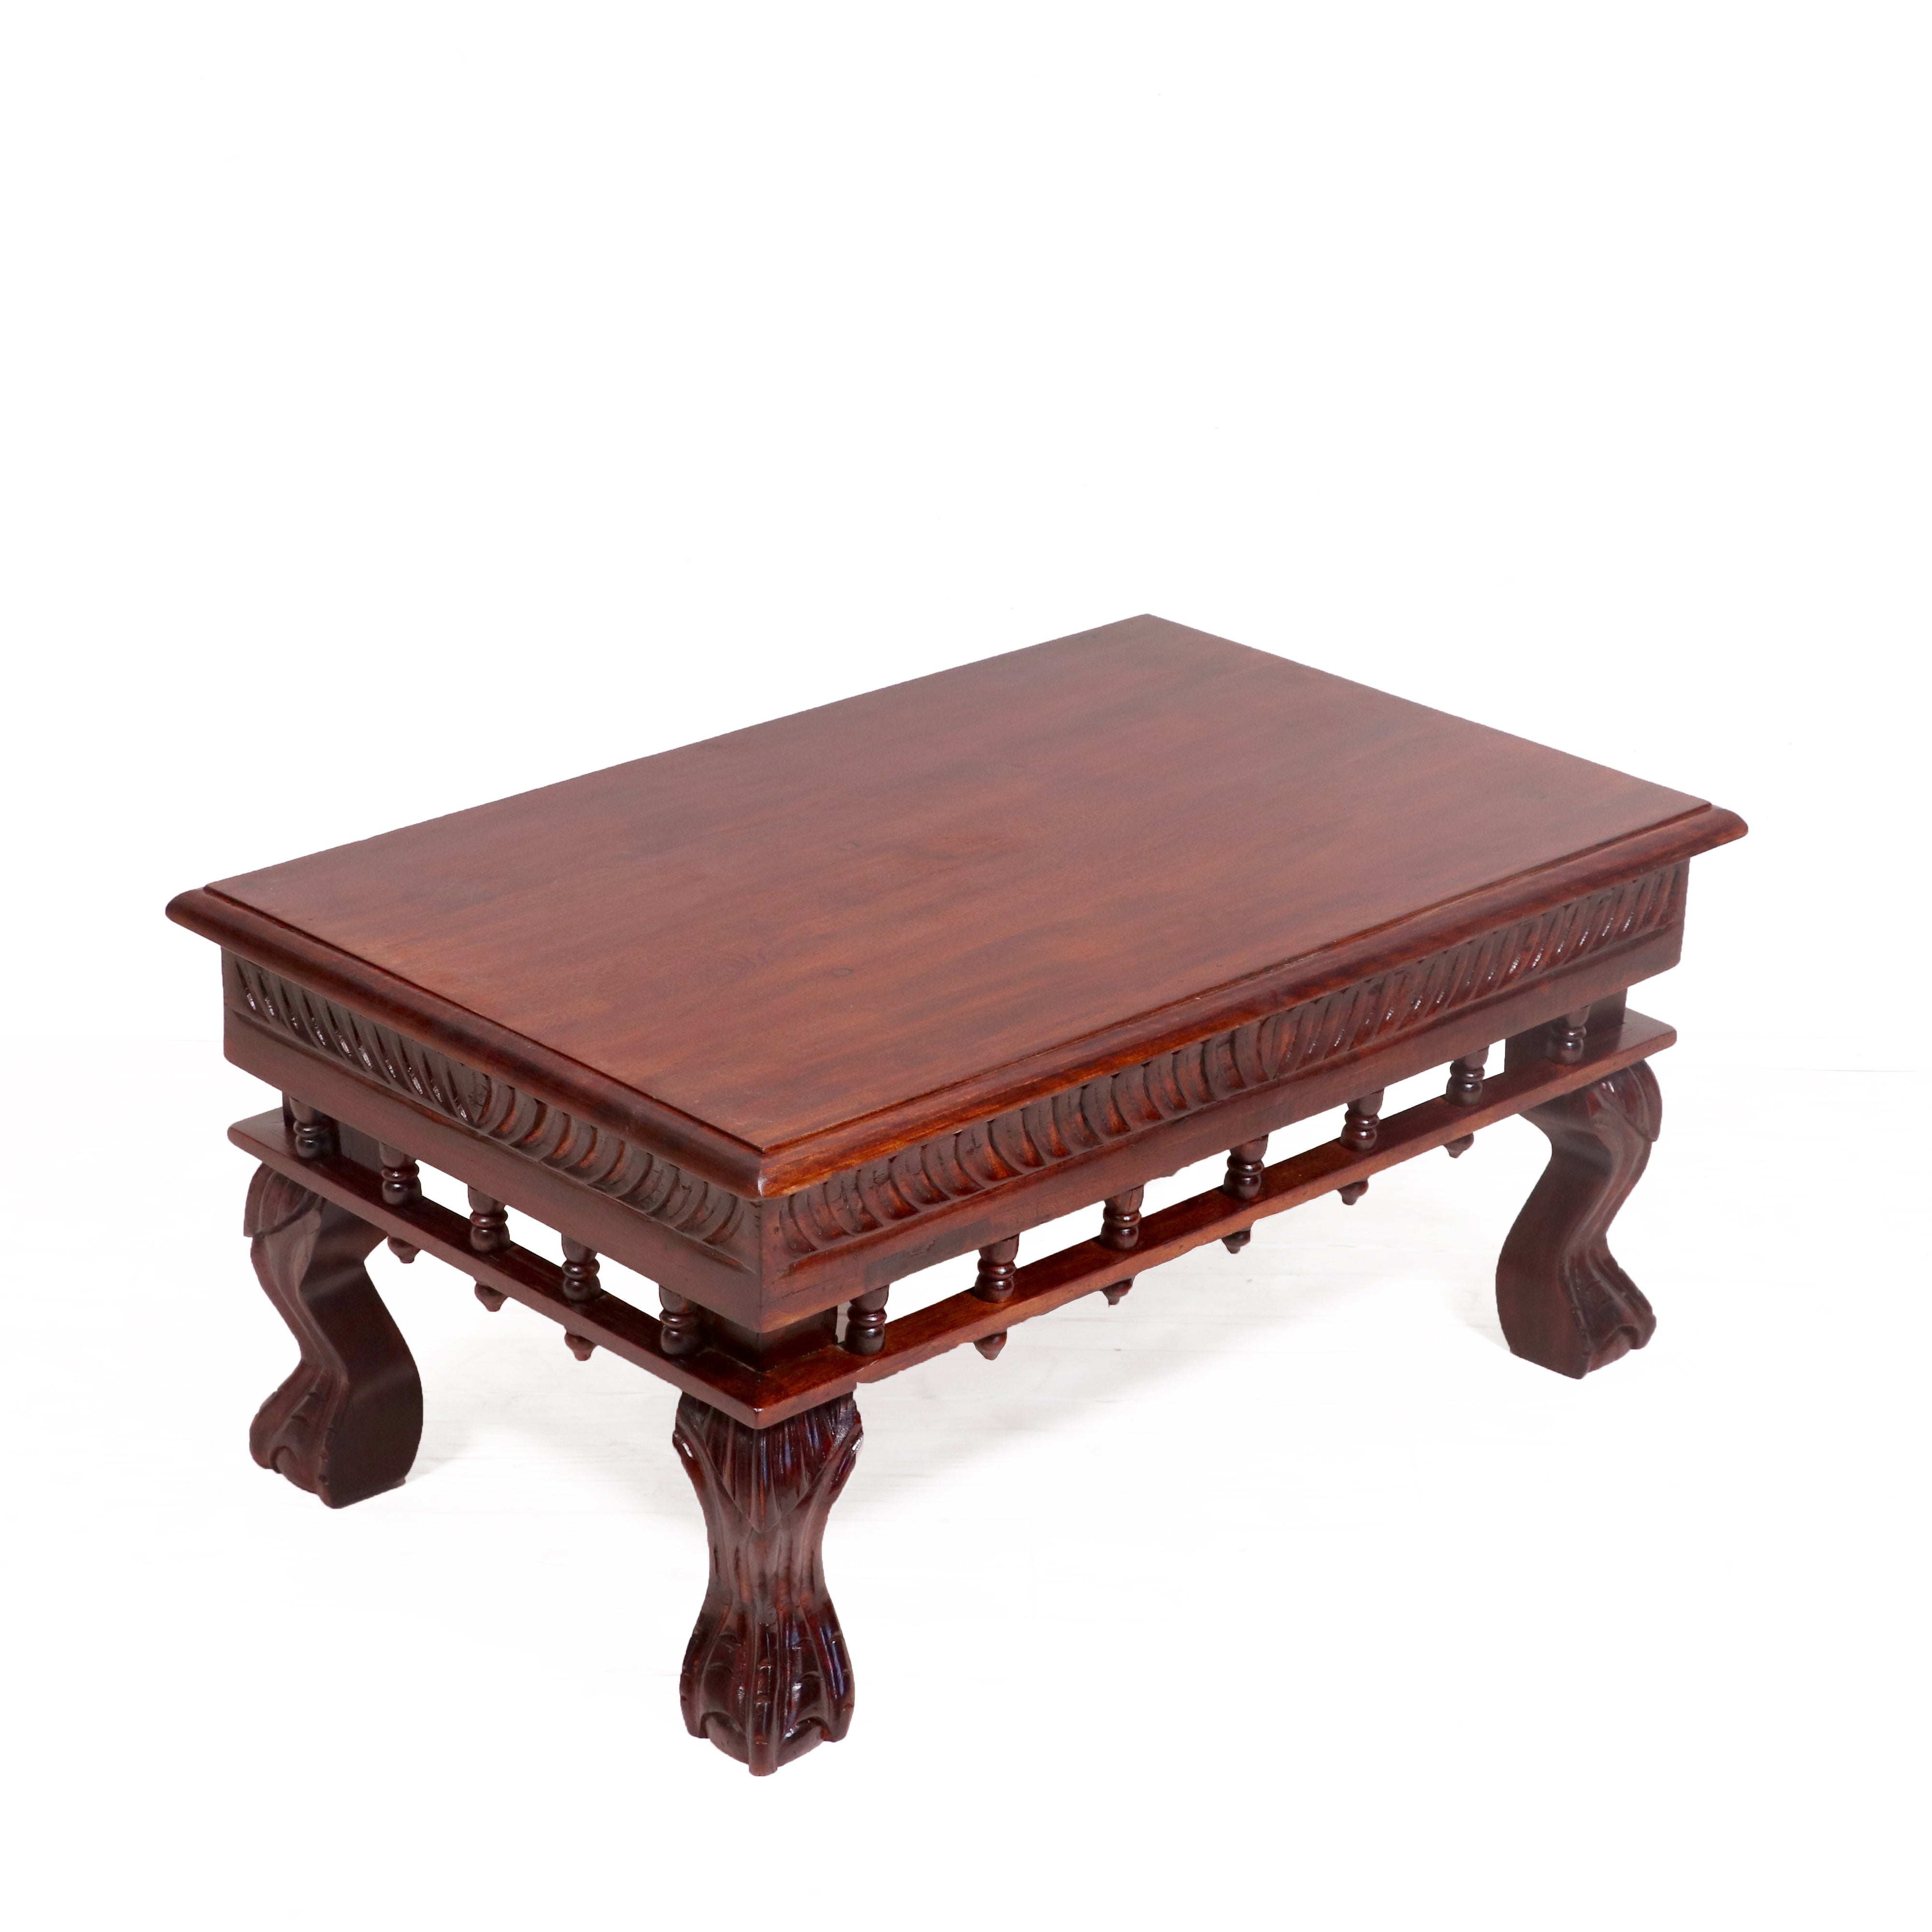 Wooden compact Ethnic Style coffee table Coffee Table